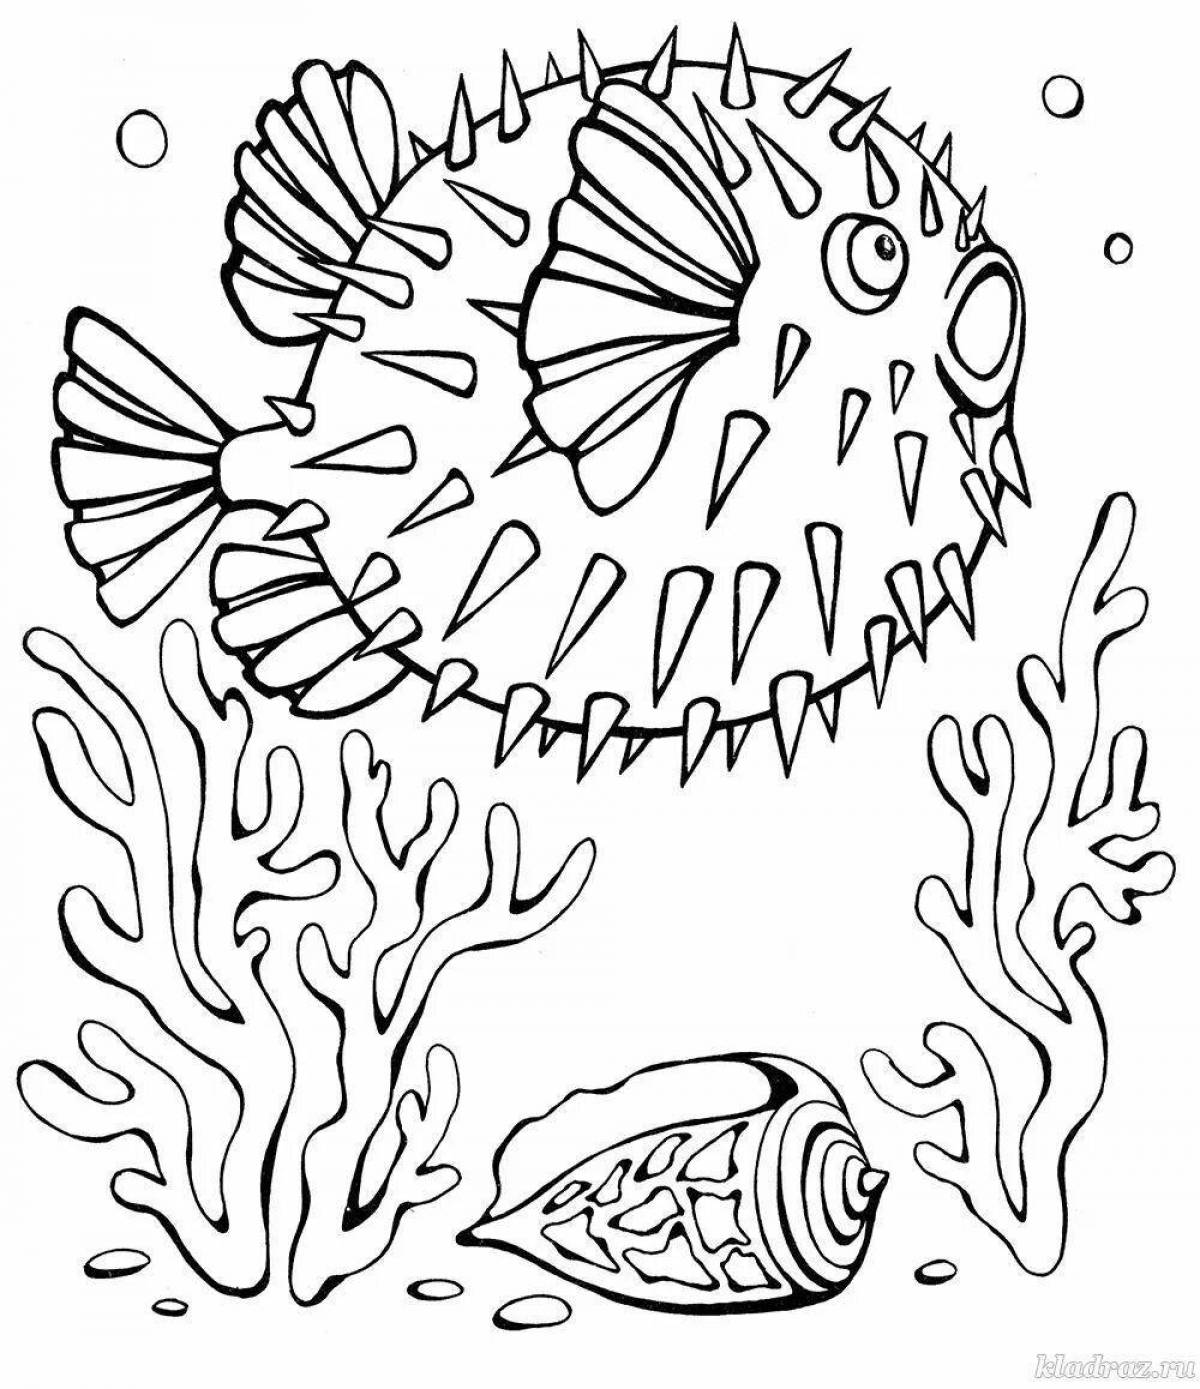 Coloring book magical underwater world